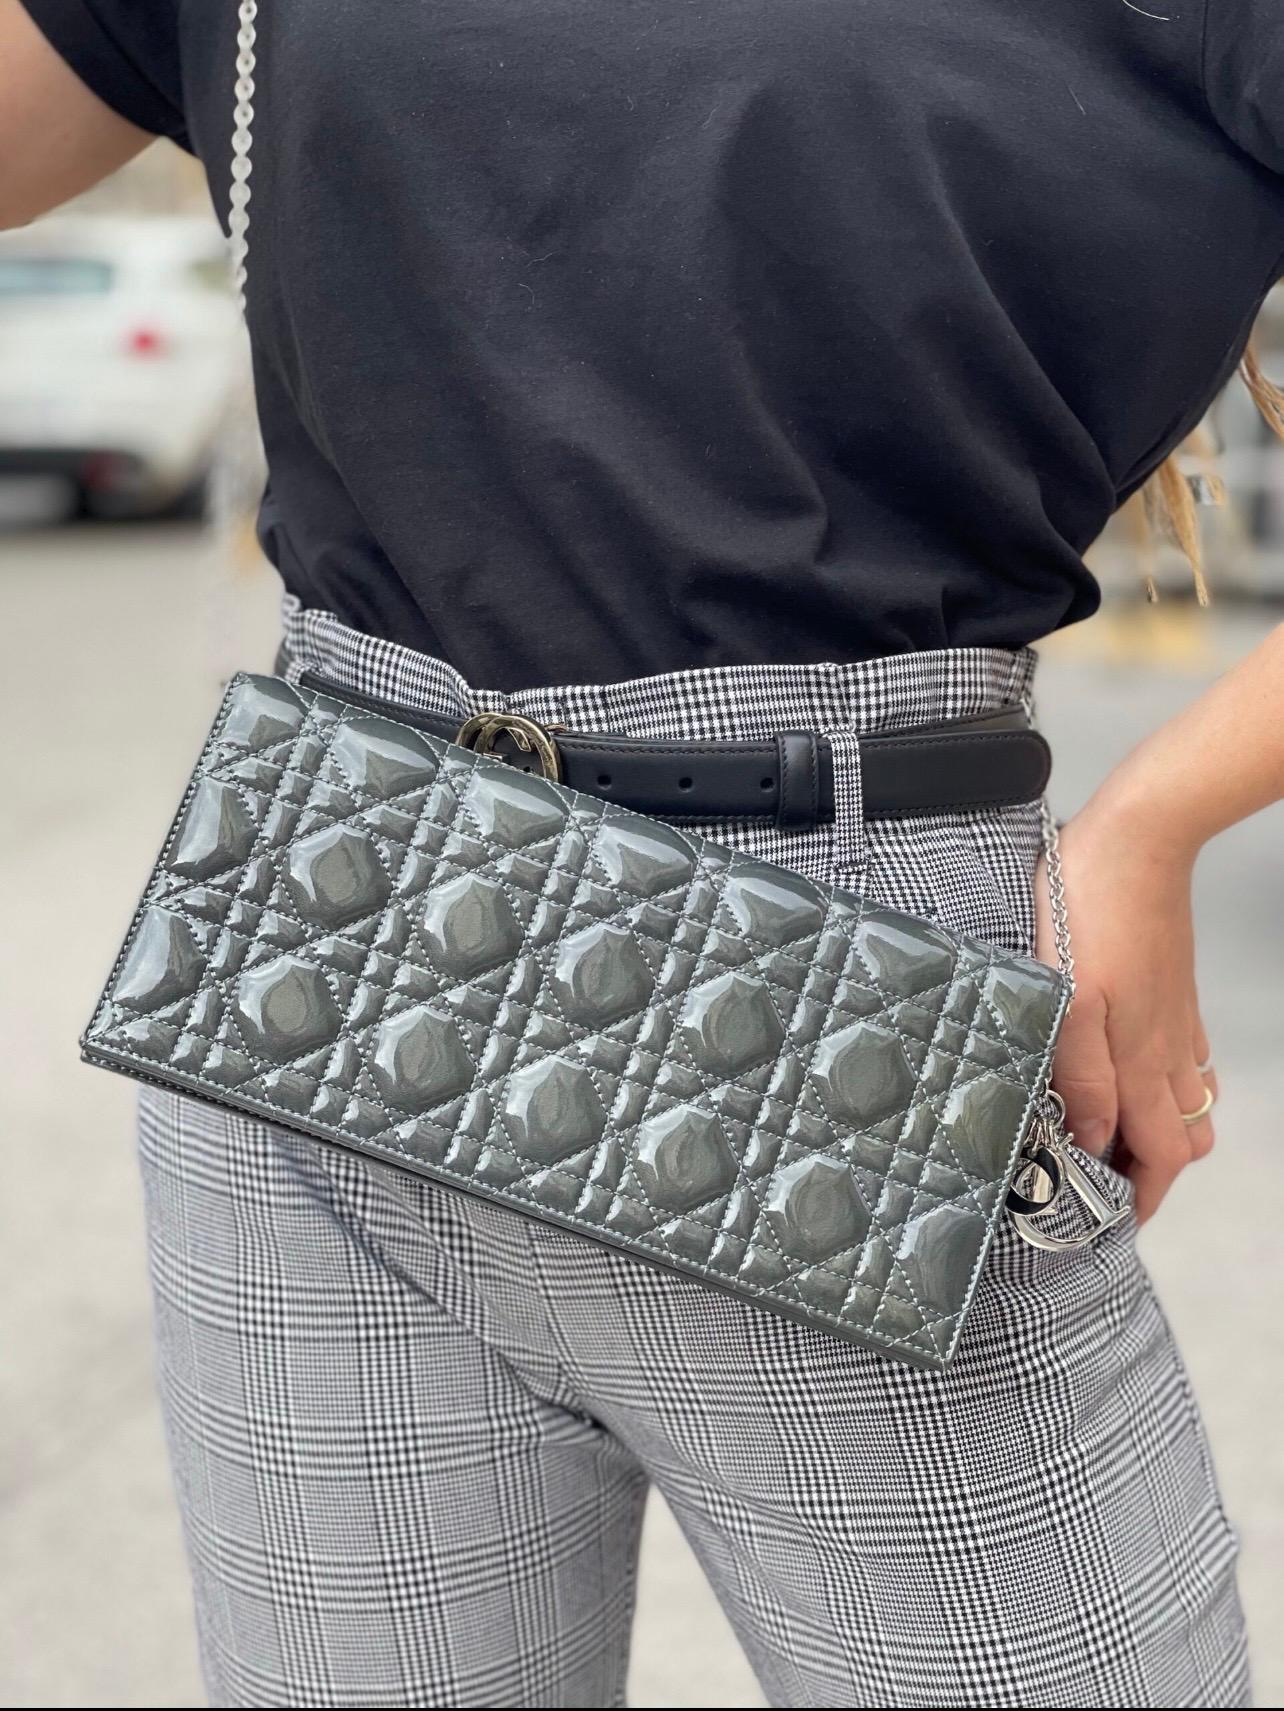 Dior Lady Dior model clutch in gray patent leather with silver hardware.
Equipped with removable chain shoulder strap.
Button closure, internally capacious for the essential.
The product is in excellent condition.